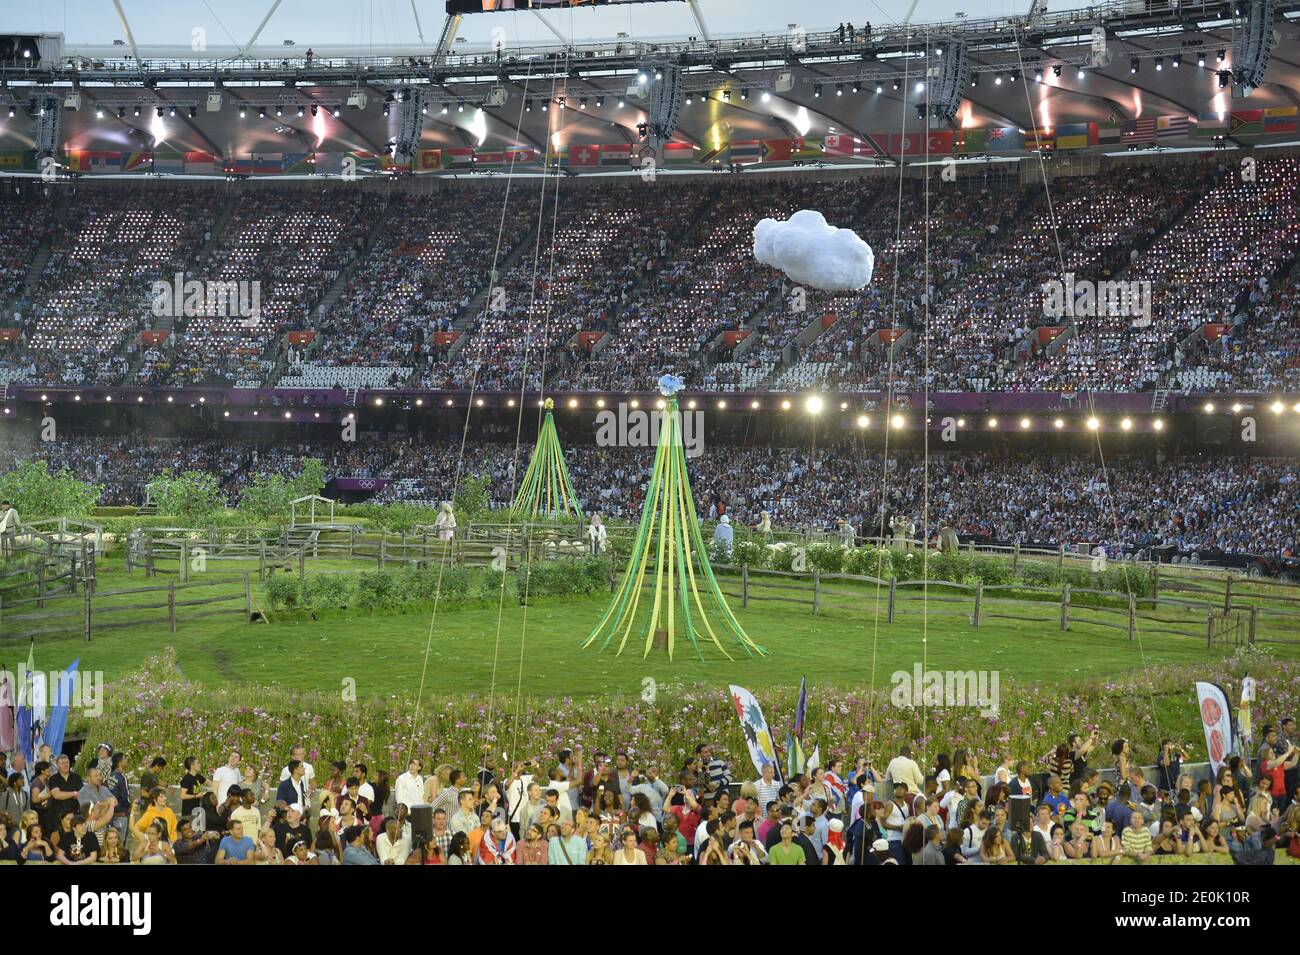 The show during the London Olympic Games 2012 Opening Ceremony at the Olympic Stadium, London Olympic Games in London, UK on July 27, 2012. Photo by ABACAPRESS.COM Stock Photo